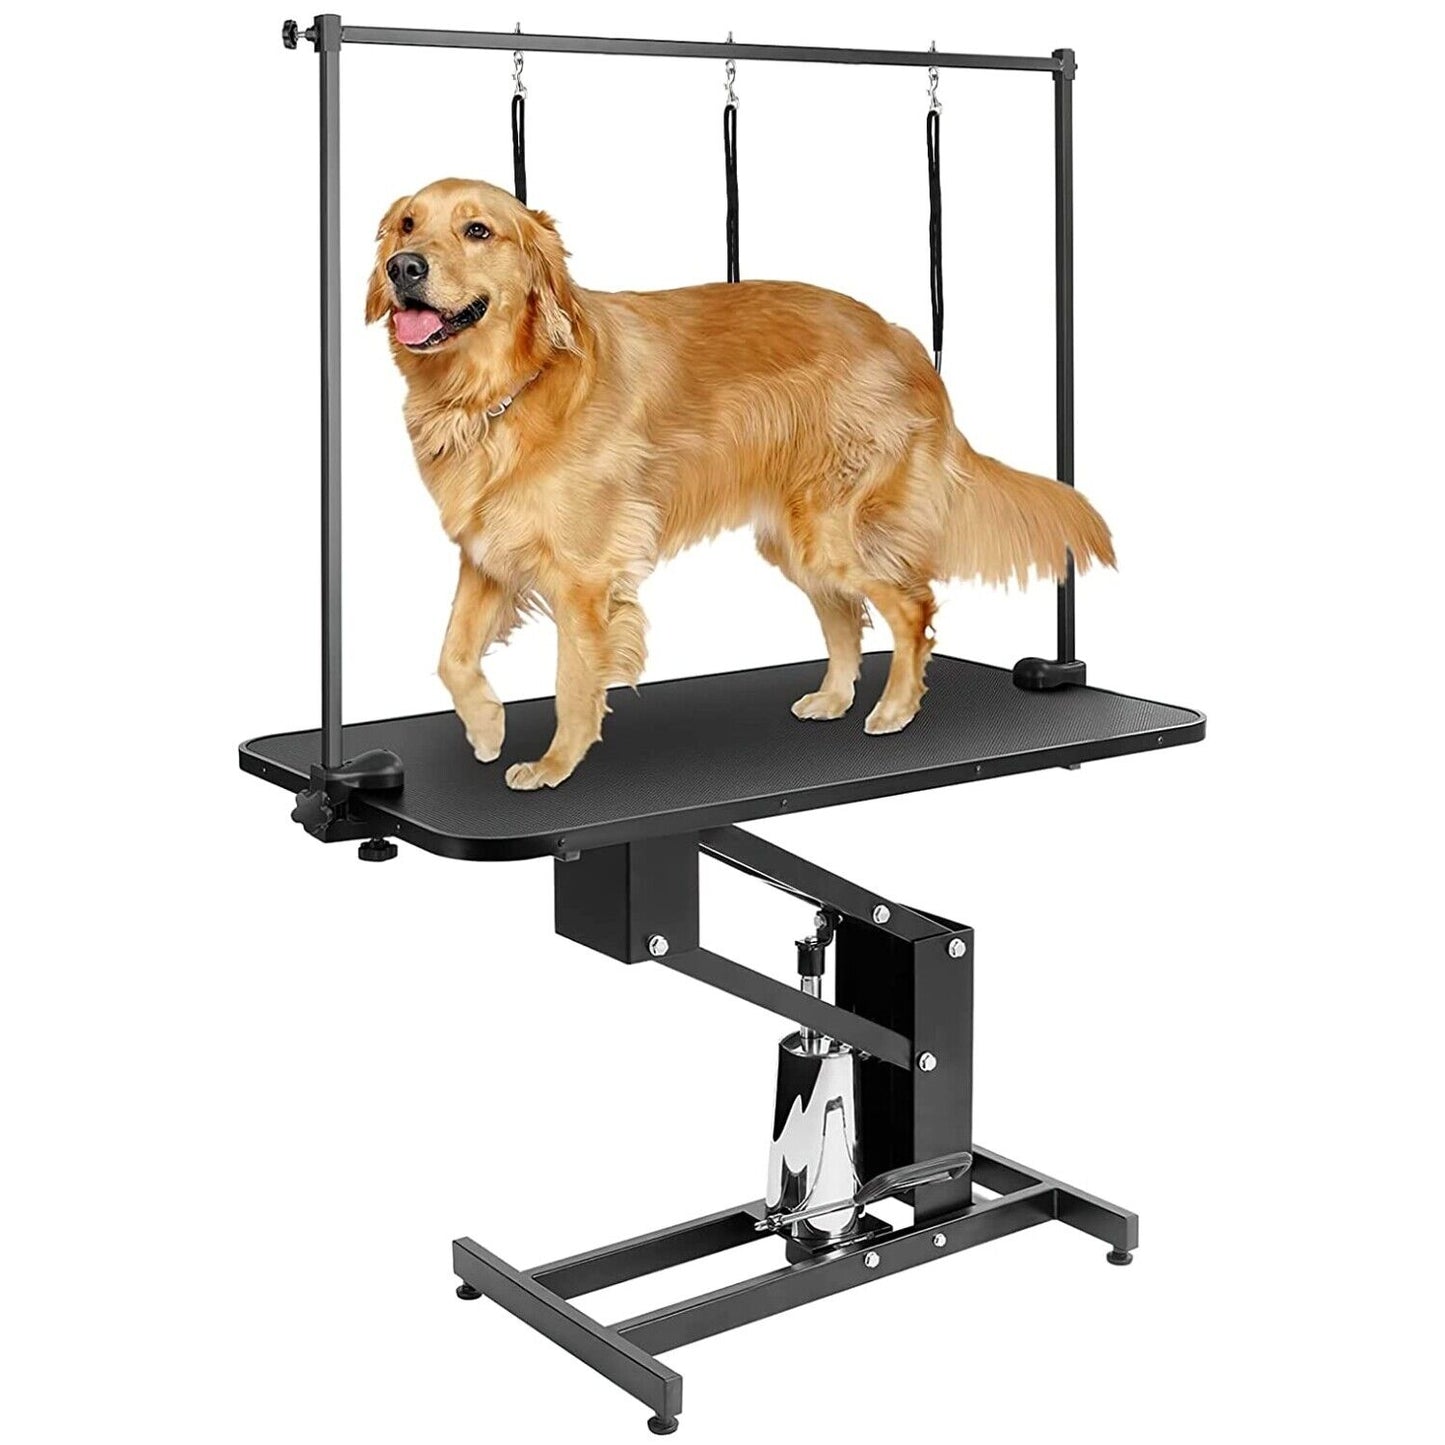 Arlopu 43" Hydraulic Dog Grooming Table, Oversized Adjustable Pet Trimming Table, Heavy-Duty Professional Dog Drying Table with 3 Nooses, Arms,for Puppy, Large Dogs, Home, Pet Shop, Range 22-38''